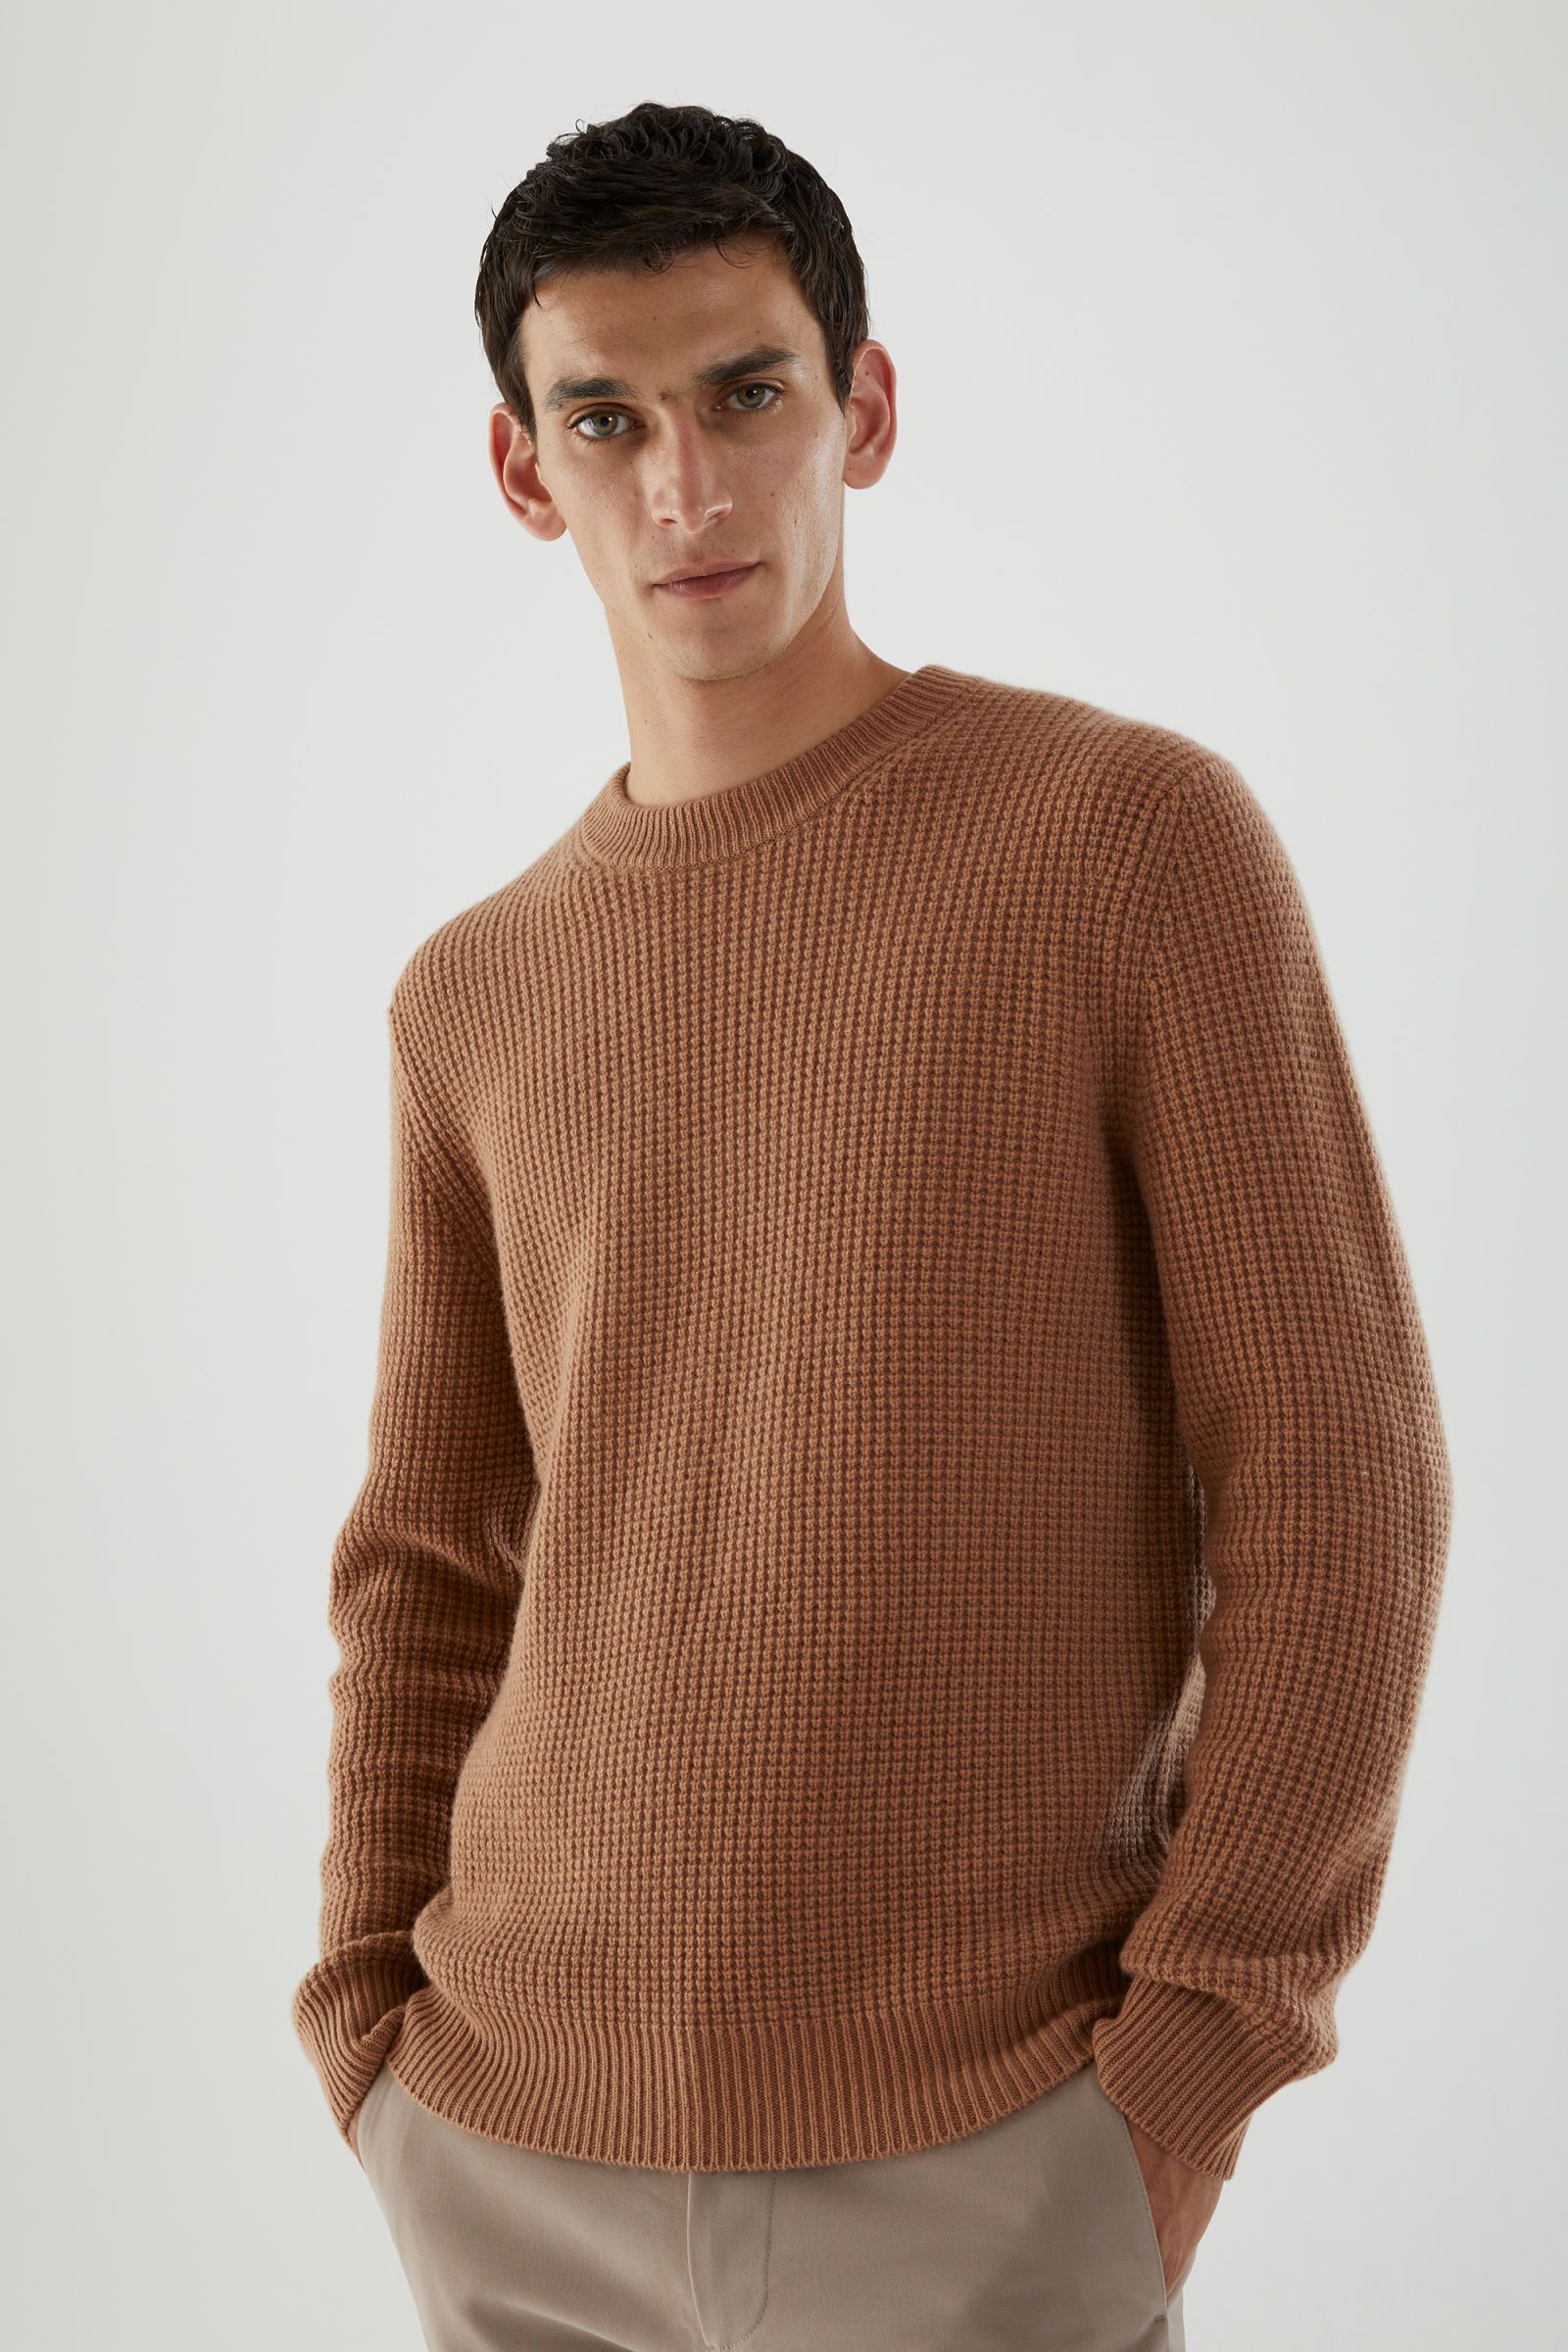 Ferragamo Cashmere Turtleneck in Brown for Men Mens Clothing Sweaters and knitwear Turtlenecks 